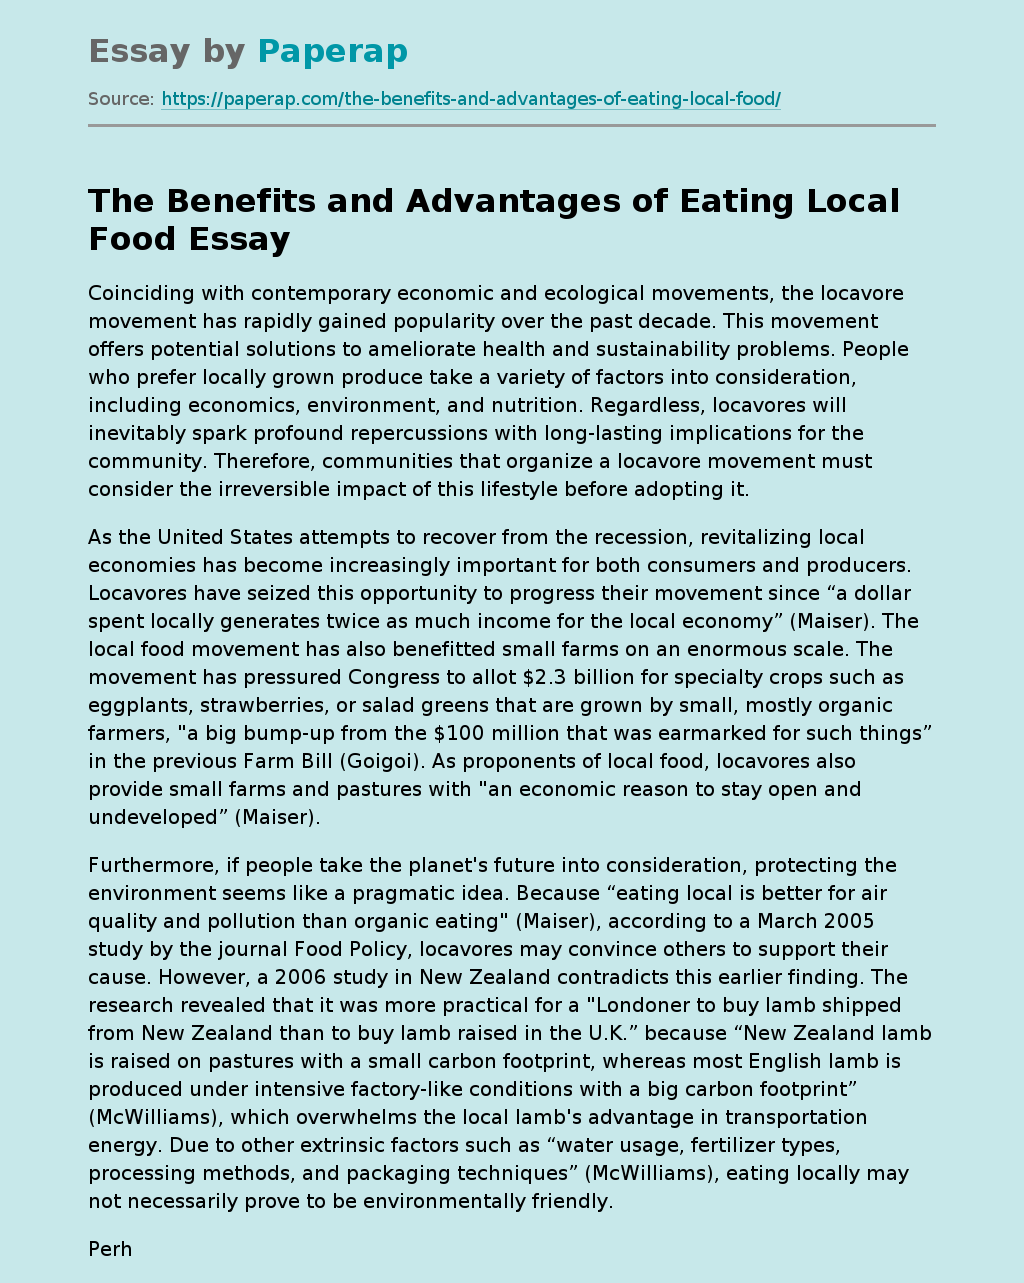 The Benefits and Advantages of Eating Local Food